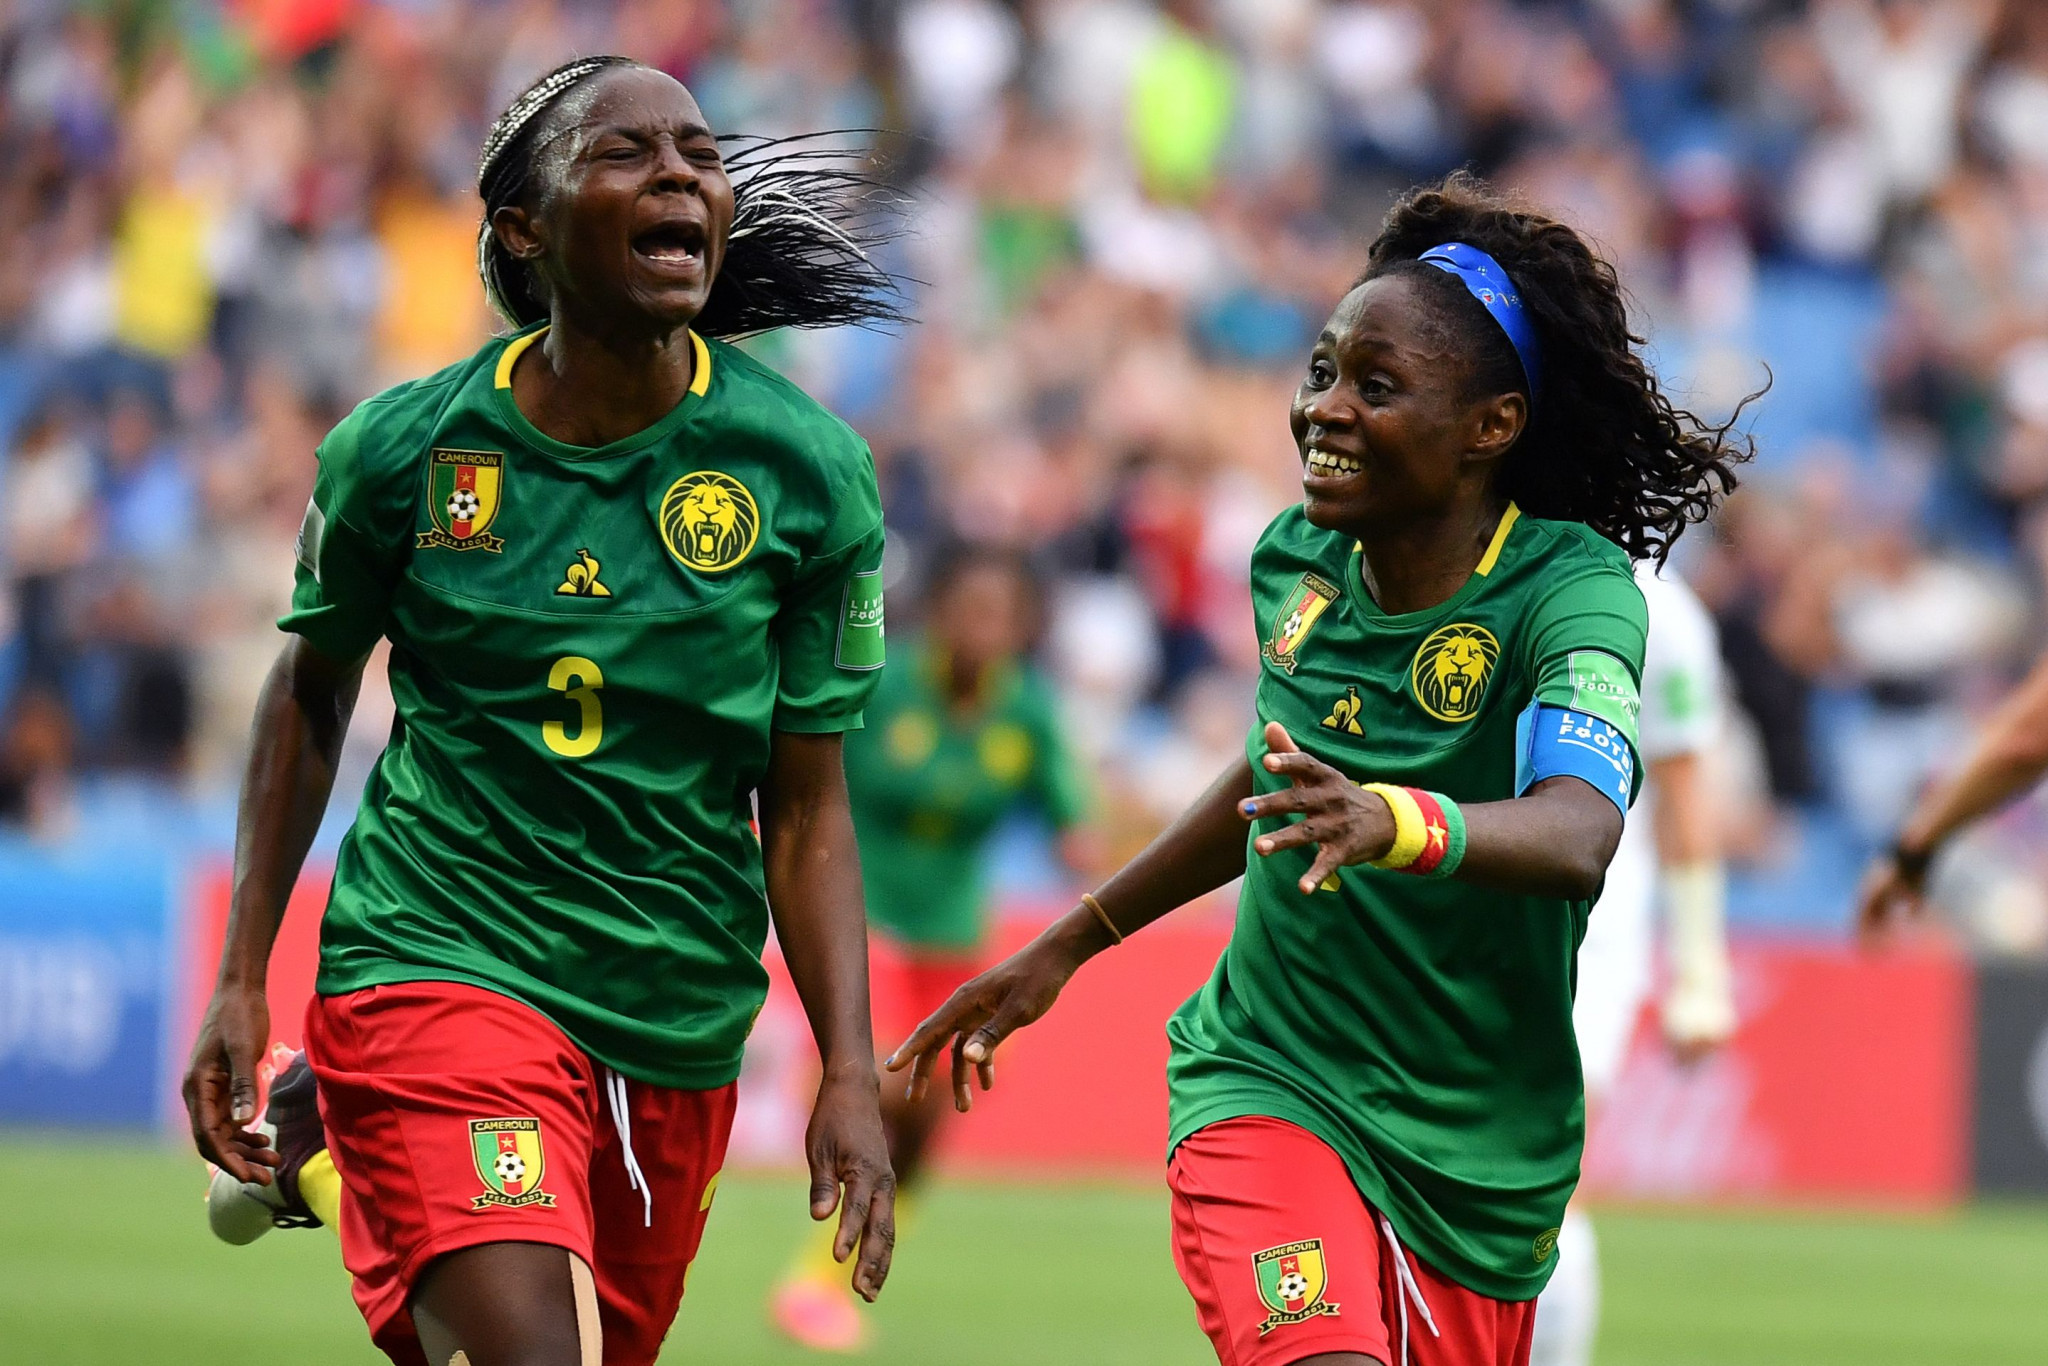 Nchout then hit the back of the net in the last minute of play, securing a 2-1 win and sending Cameroon through ©Getty Images